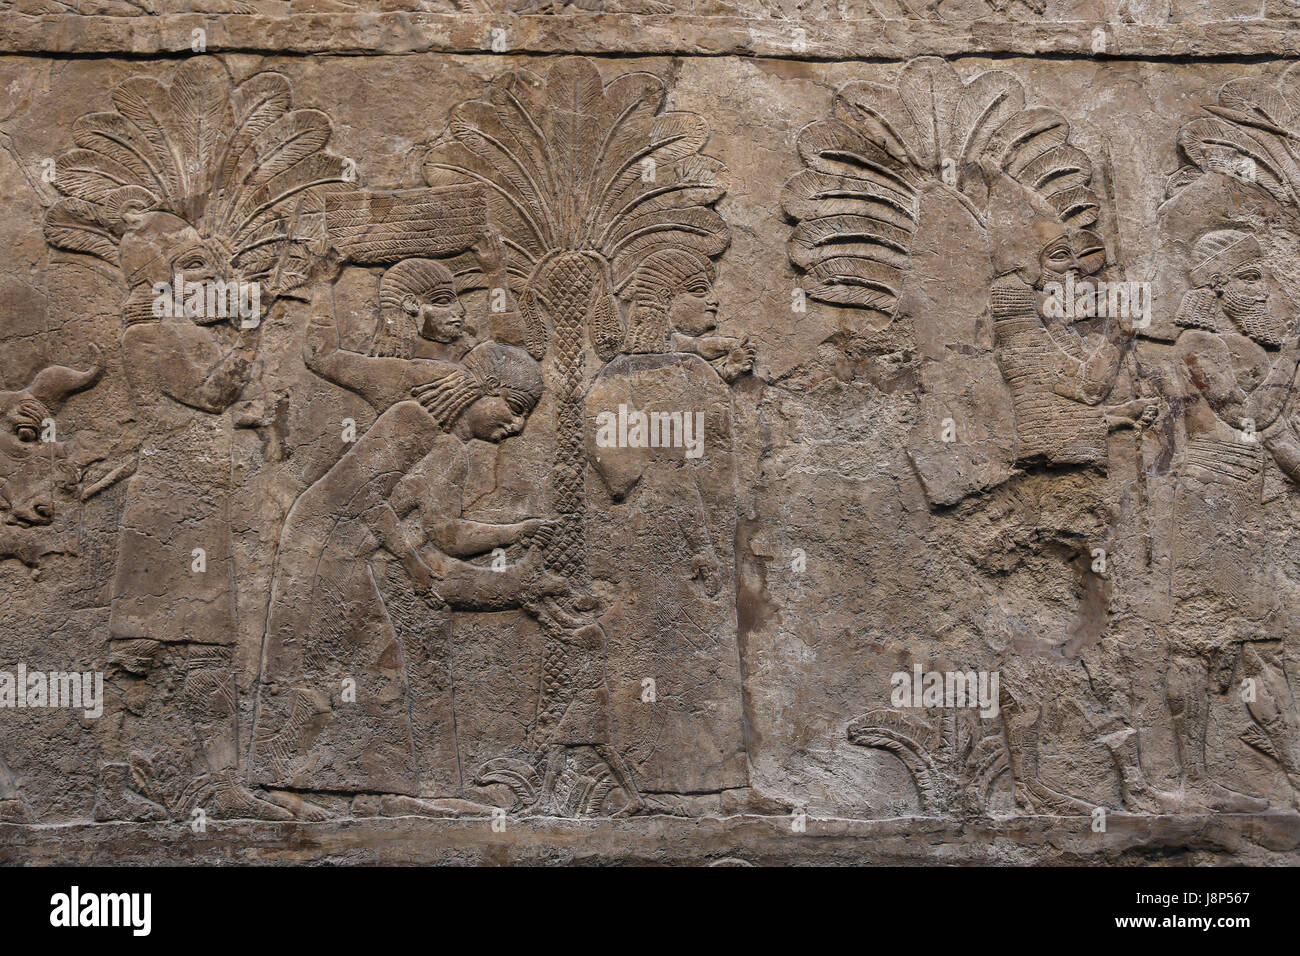 Campaigning in southern Iraq. Prisoners acompanied by their families. Assyrian, 640-620 BC. Nineveh, South-West Palace, Iraq. British Museum. London. Stock Photo